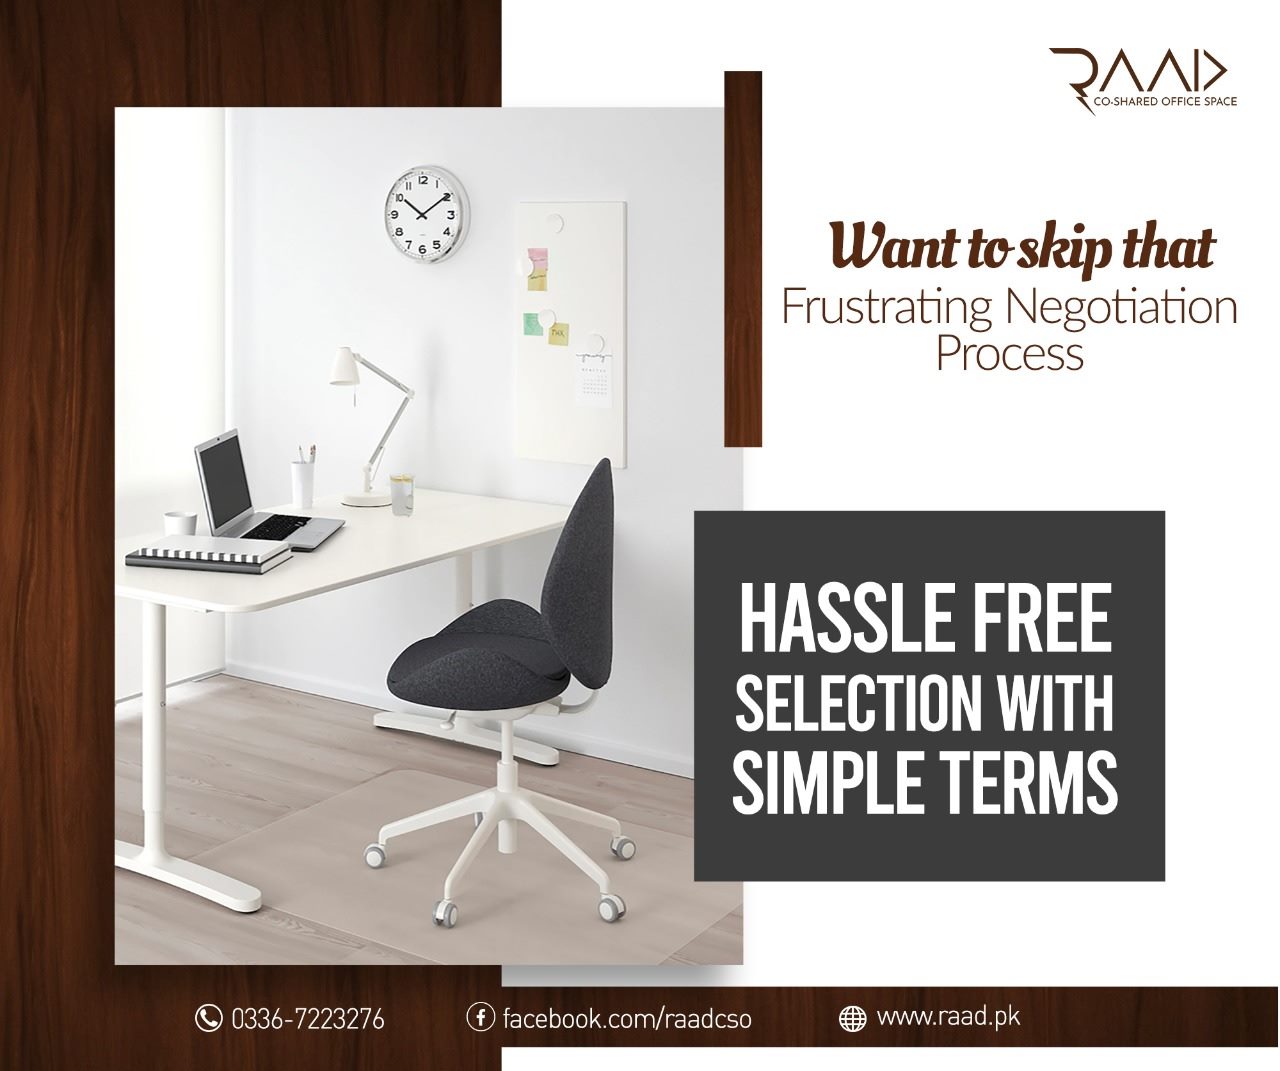 Start a business at RAAD